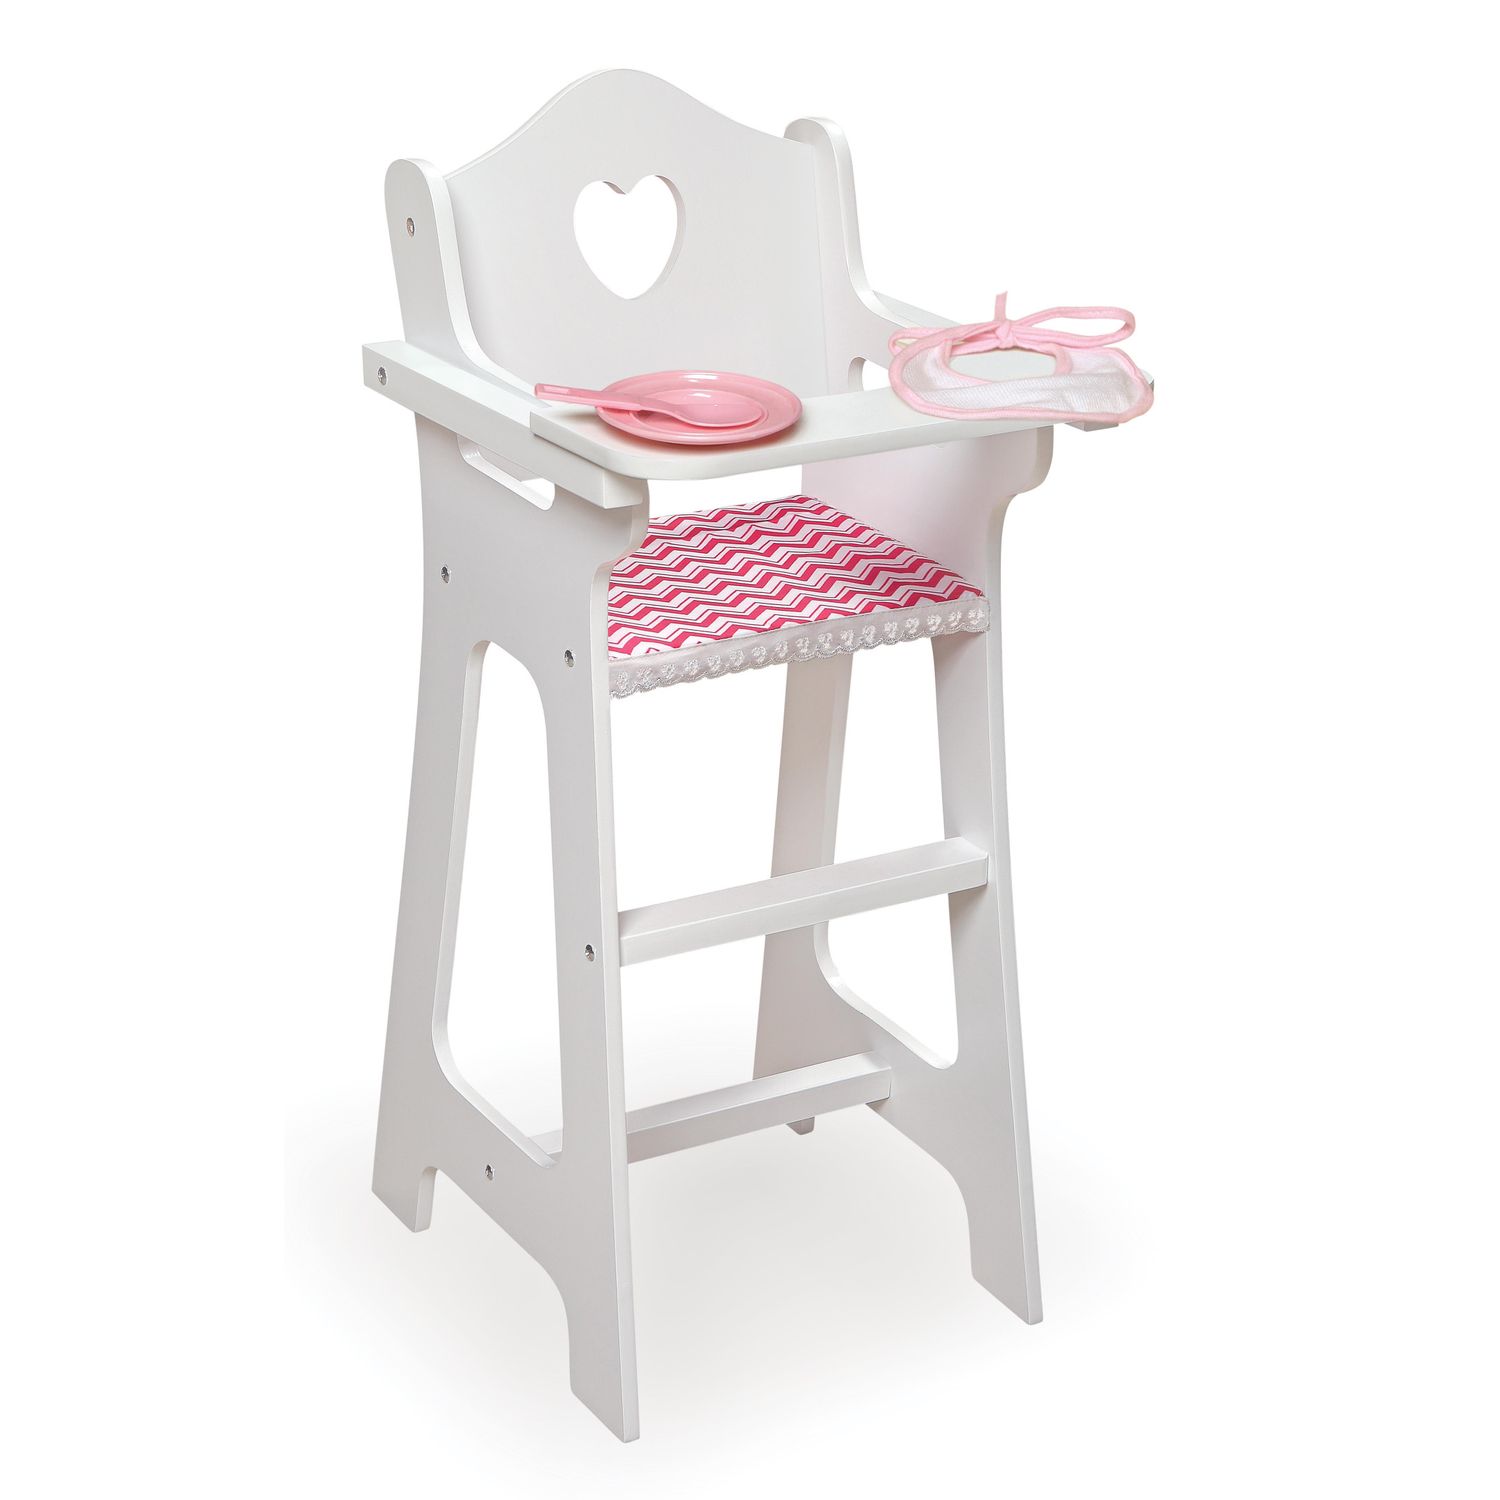 wooden high chair for dolls